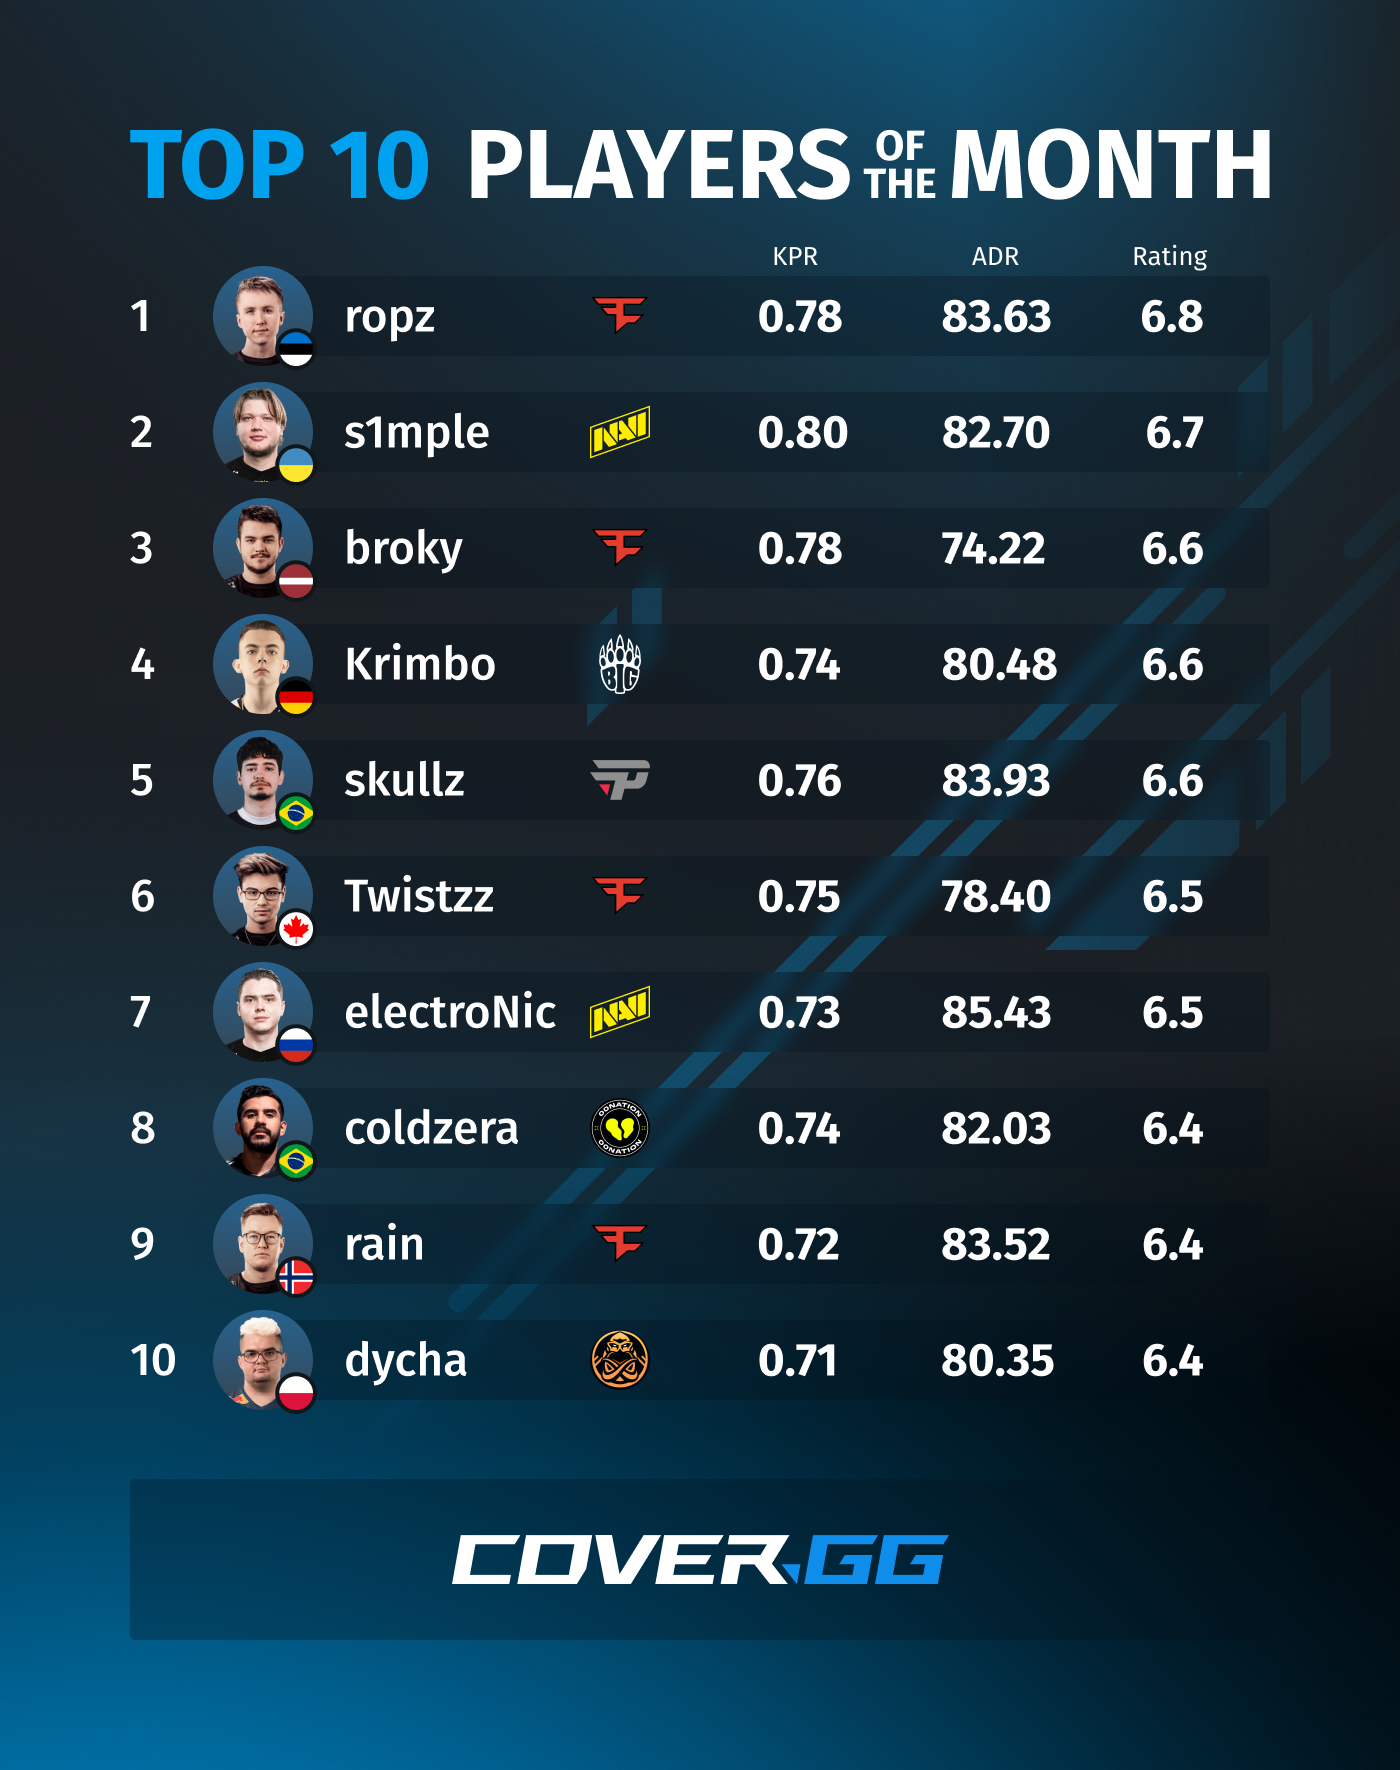 The final top 10 CS:GO players of March by Cover.gg